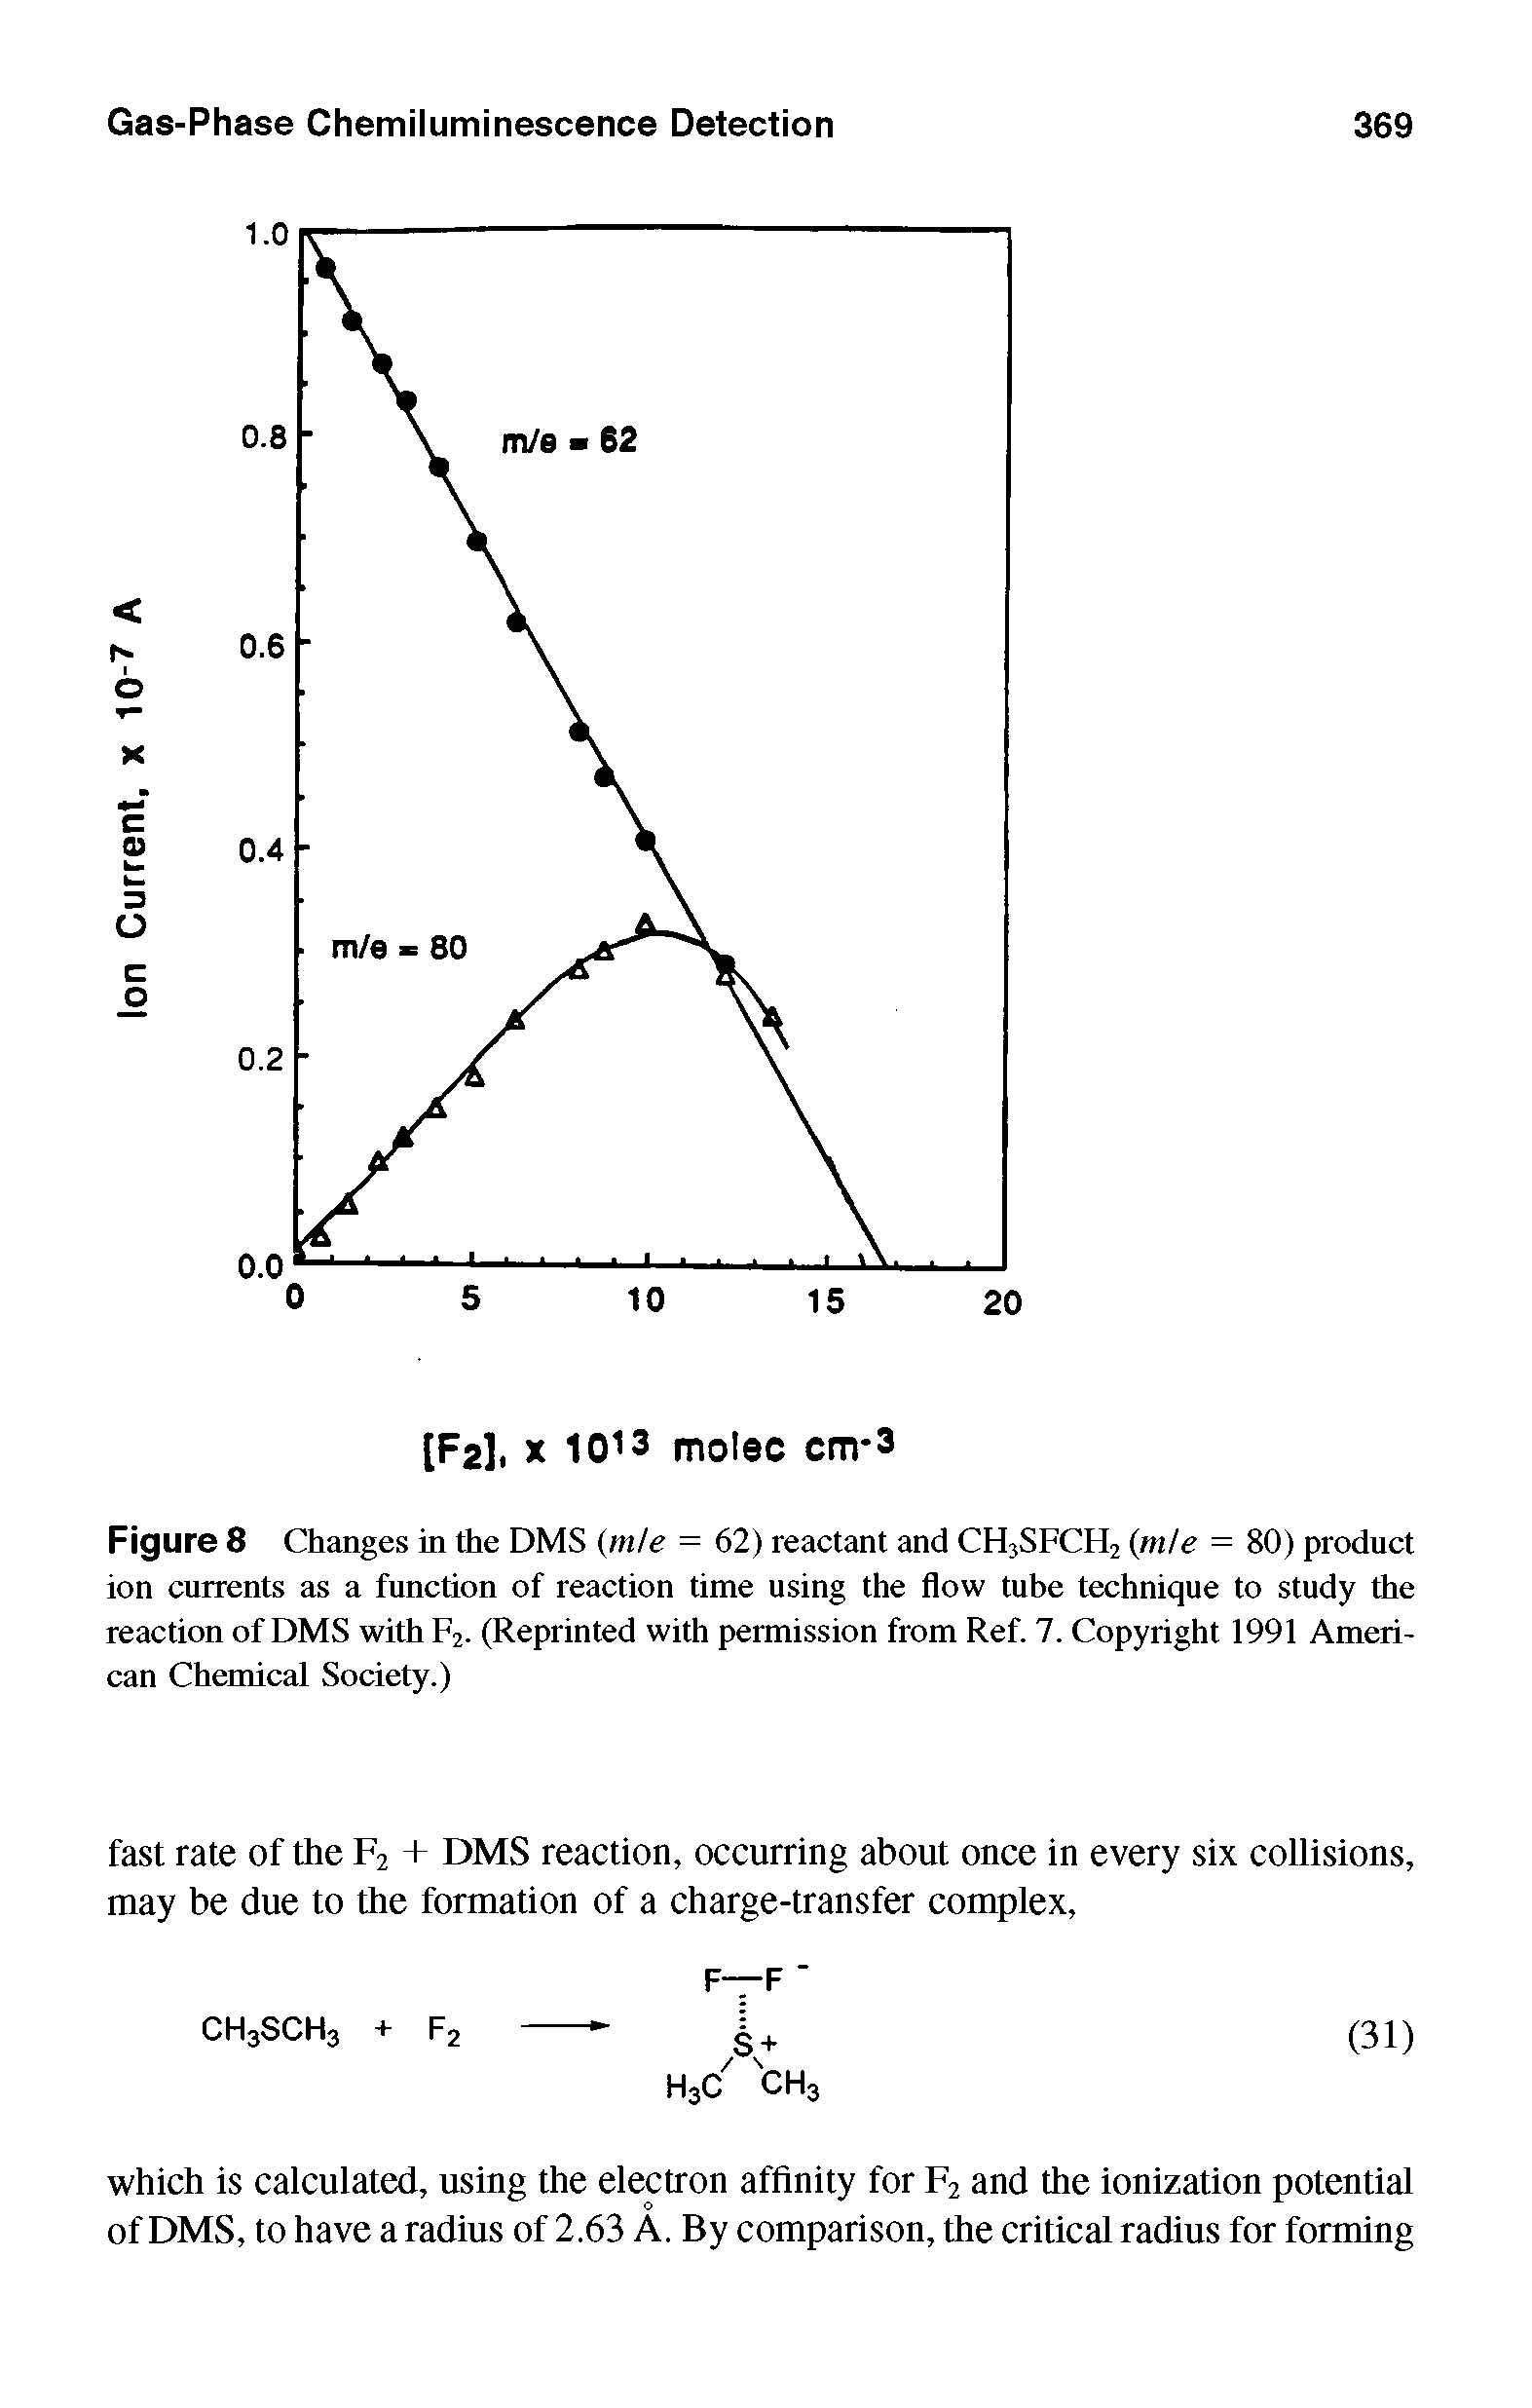 Figure 8 Changes in the DMS (mle = 62) reactant and CH3SFCH2 (m/e = 80) product ion currents as a function of reaction time using the flow tube technique to study the reaction of DMS with F2. (Reprinted with permission from Ref. 7. Copyright 1991 American Chemical Society.)...